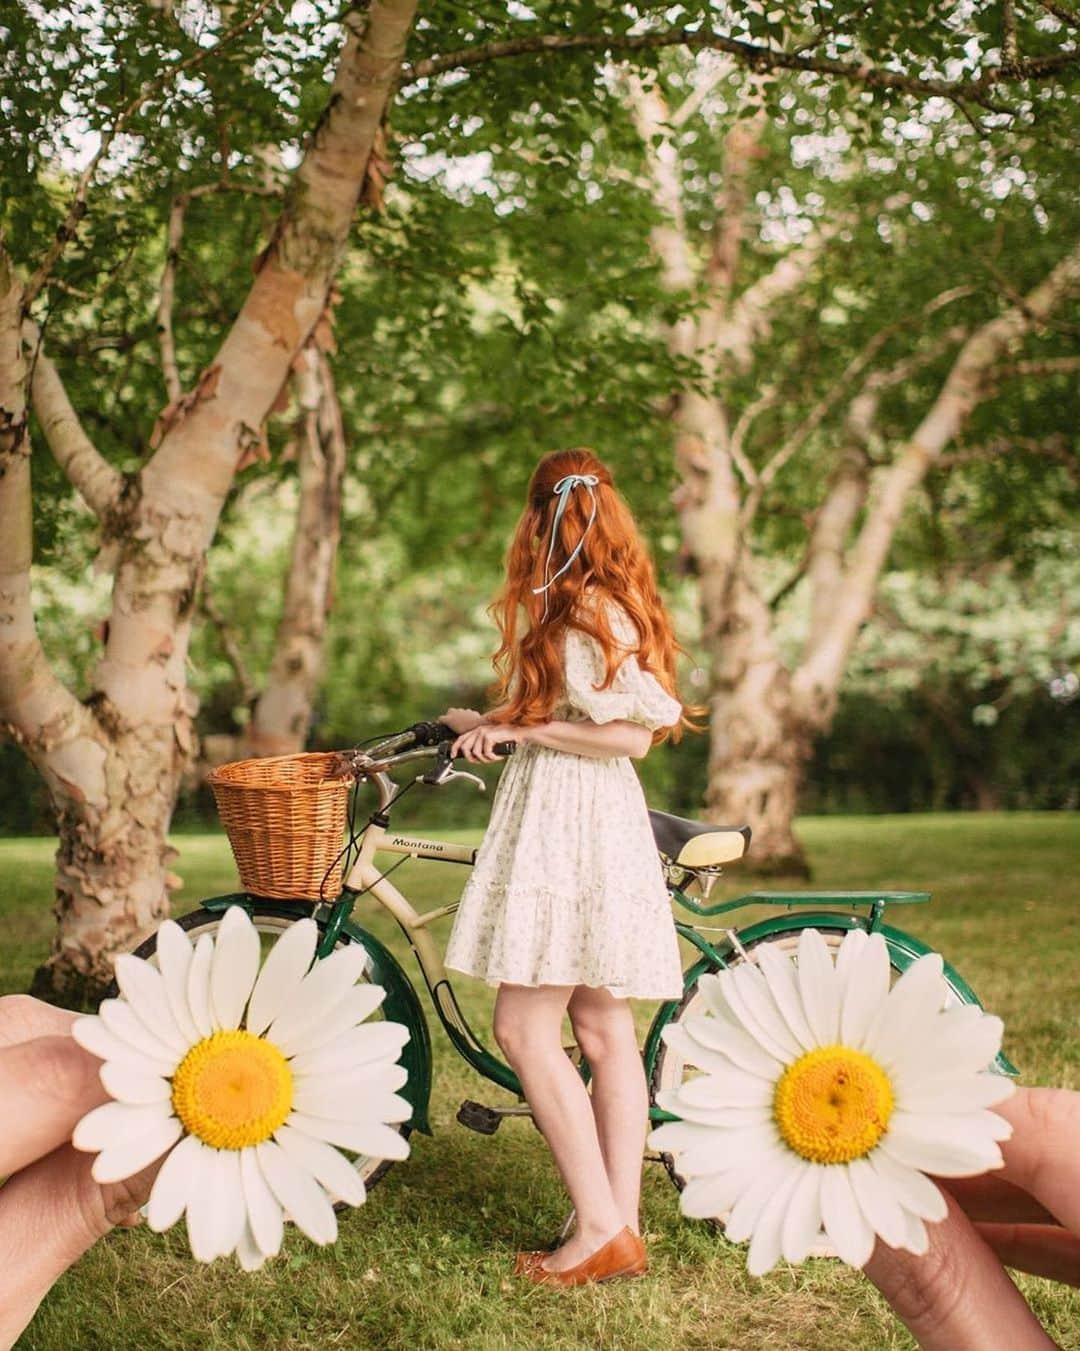 pomeloのインスタグラム：「Pomelo Cover | A creative self-portrait from @aclotheshorse  She has been trying a forced perspective image inspired by @kutovakika for ages and she finally plucked up the courage to give it a go. As a matter of fact, the pic looks sweet 🌼🌼. She had the courage to try new styles of shooting and got the ideal goal finally.  When you want to try something new, just focus on your goals but not the fear.  In addition to creative selfies, the Northern Ireland based blogger shows fans scenes of pastoral.  #peacefulness #rurallife #countrysideliving	#flowerpower #bikestagram #bicyclelove #daisyridle #womencreate #inspiredbynature #folkandstory」